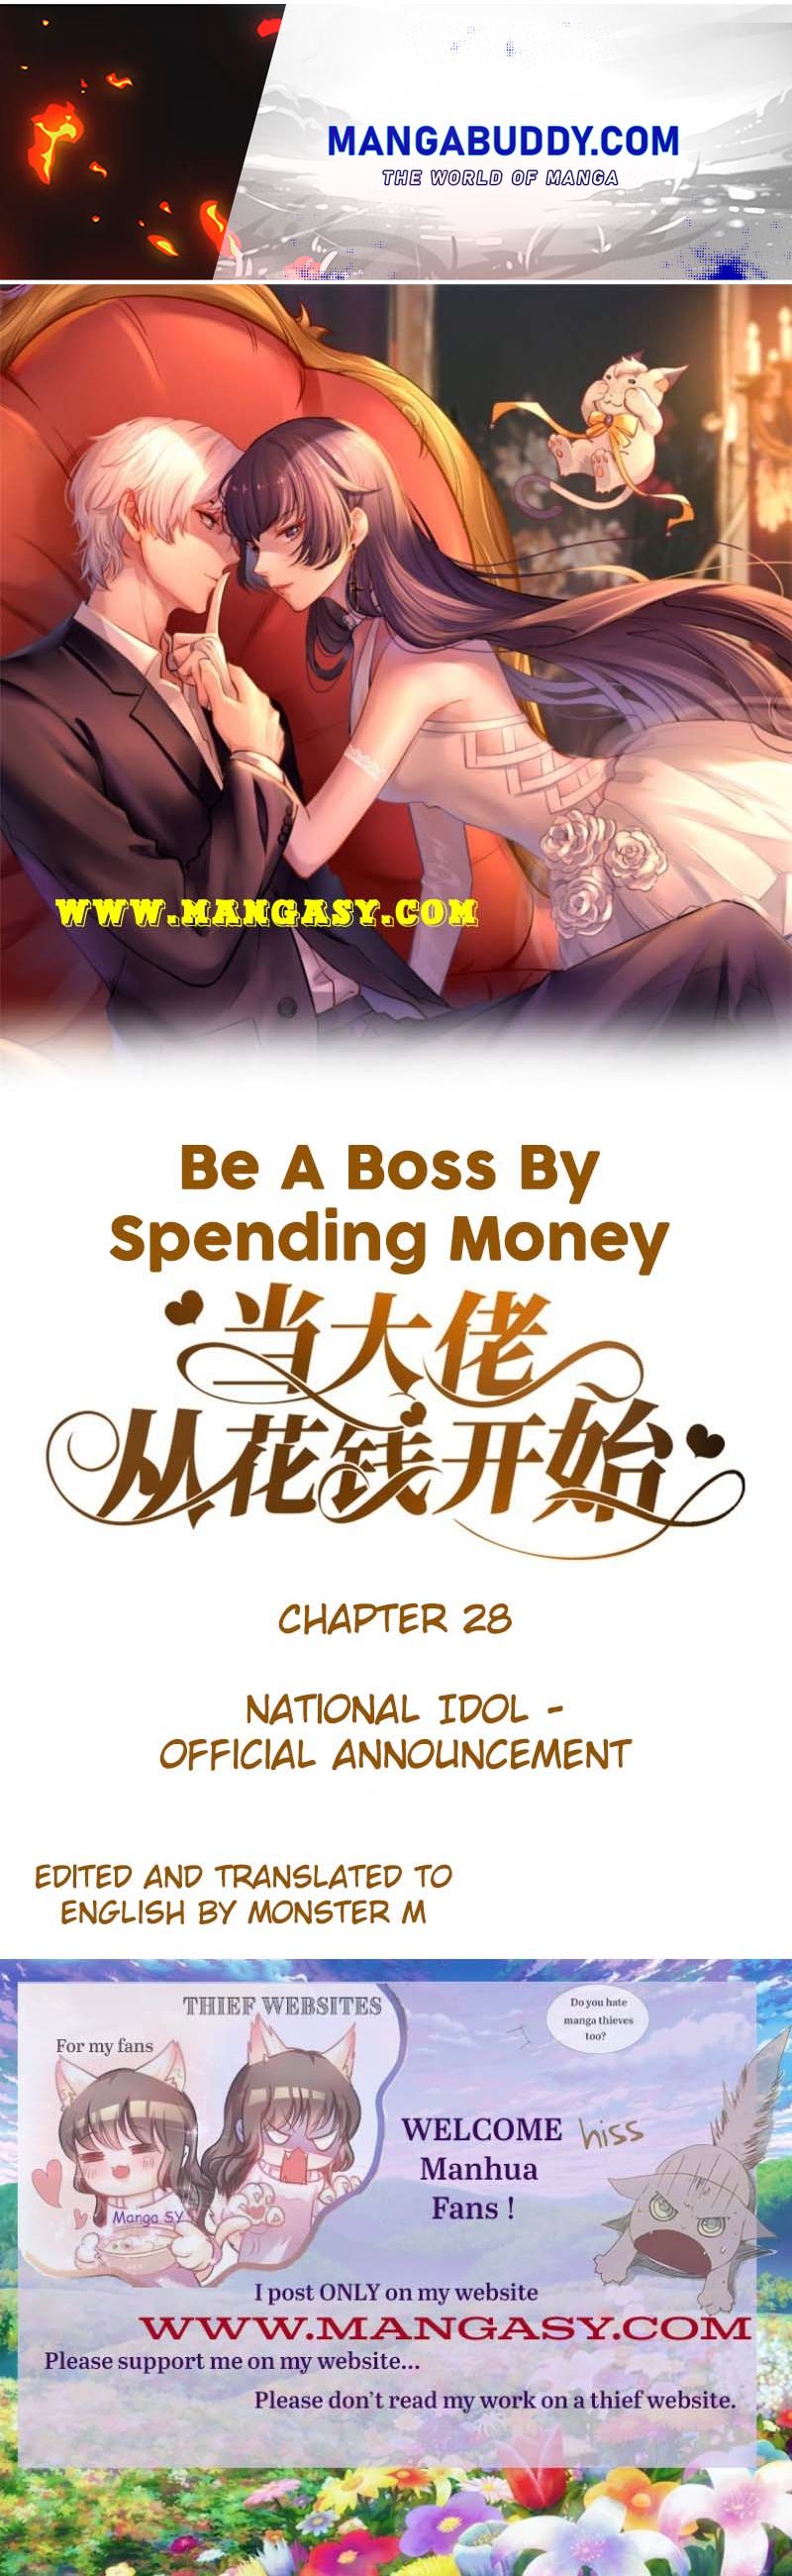 Becoming a Big Boss Starts with Spending Money chapter 28